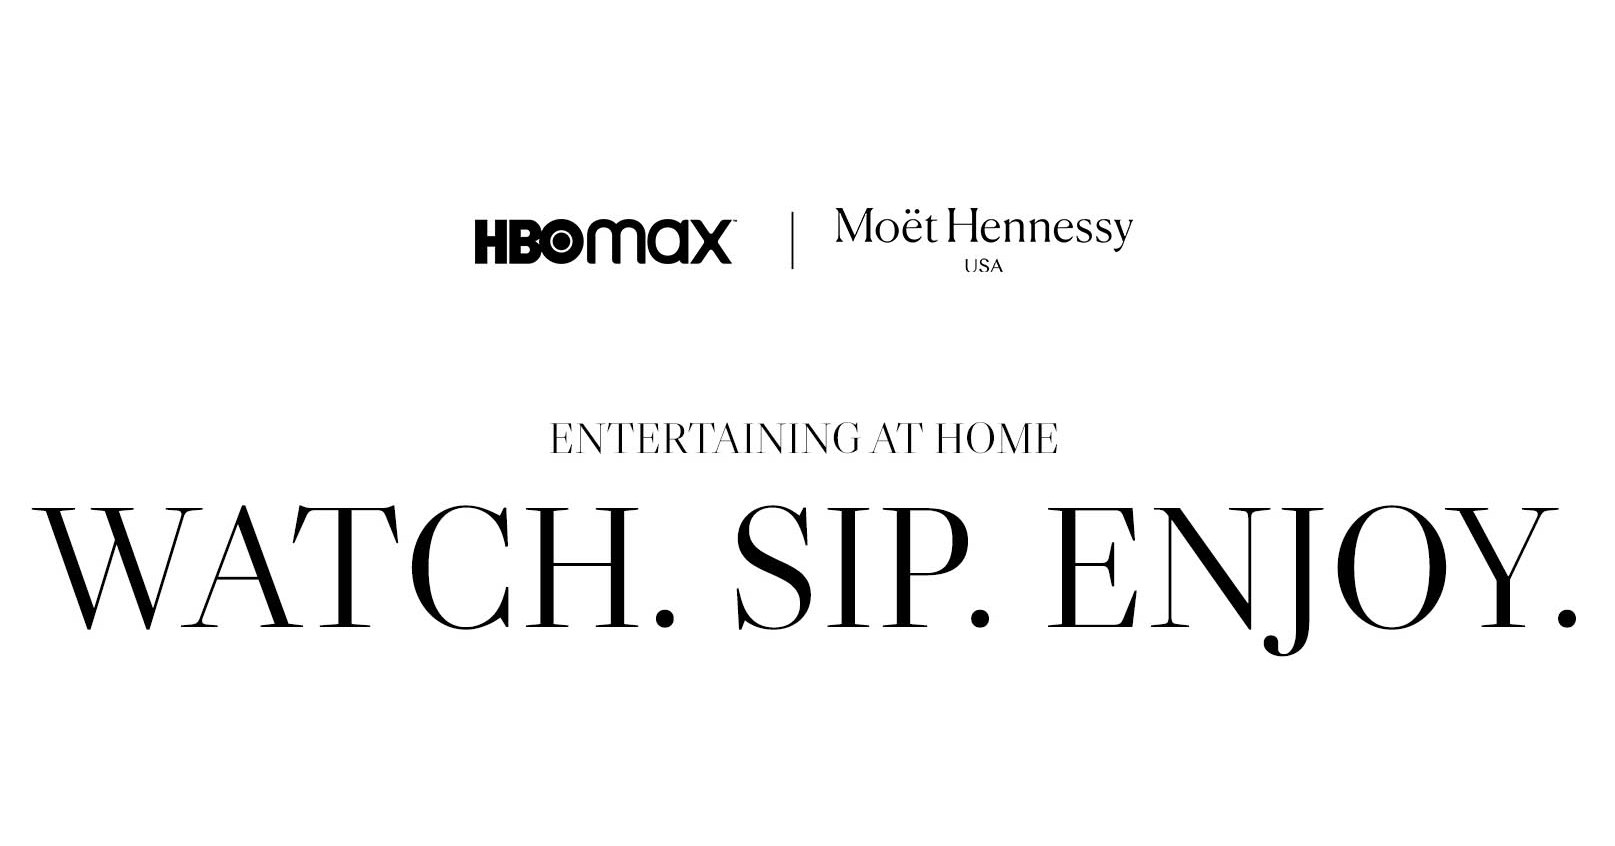 HBO Max and Moët Hennessy USA Sign Partnership